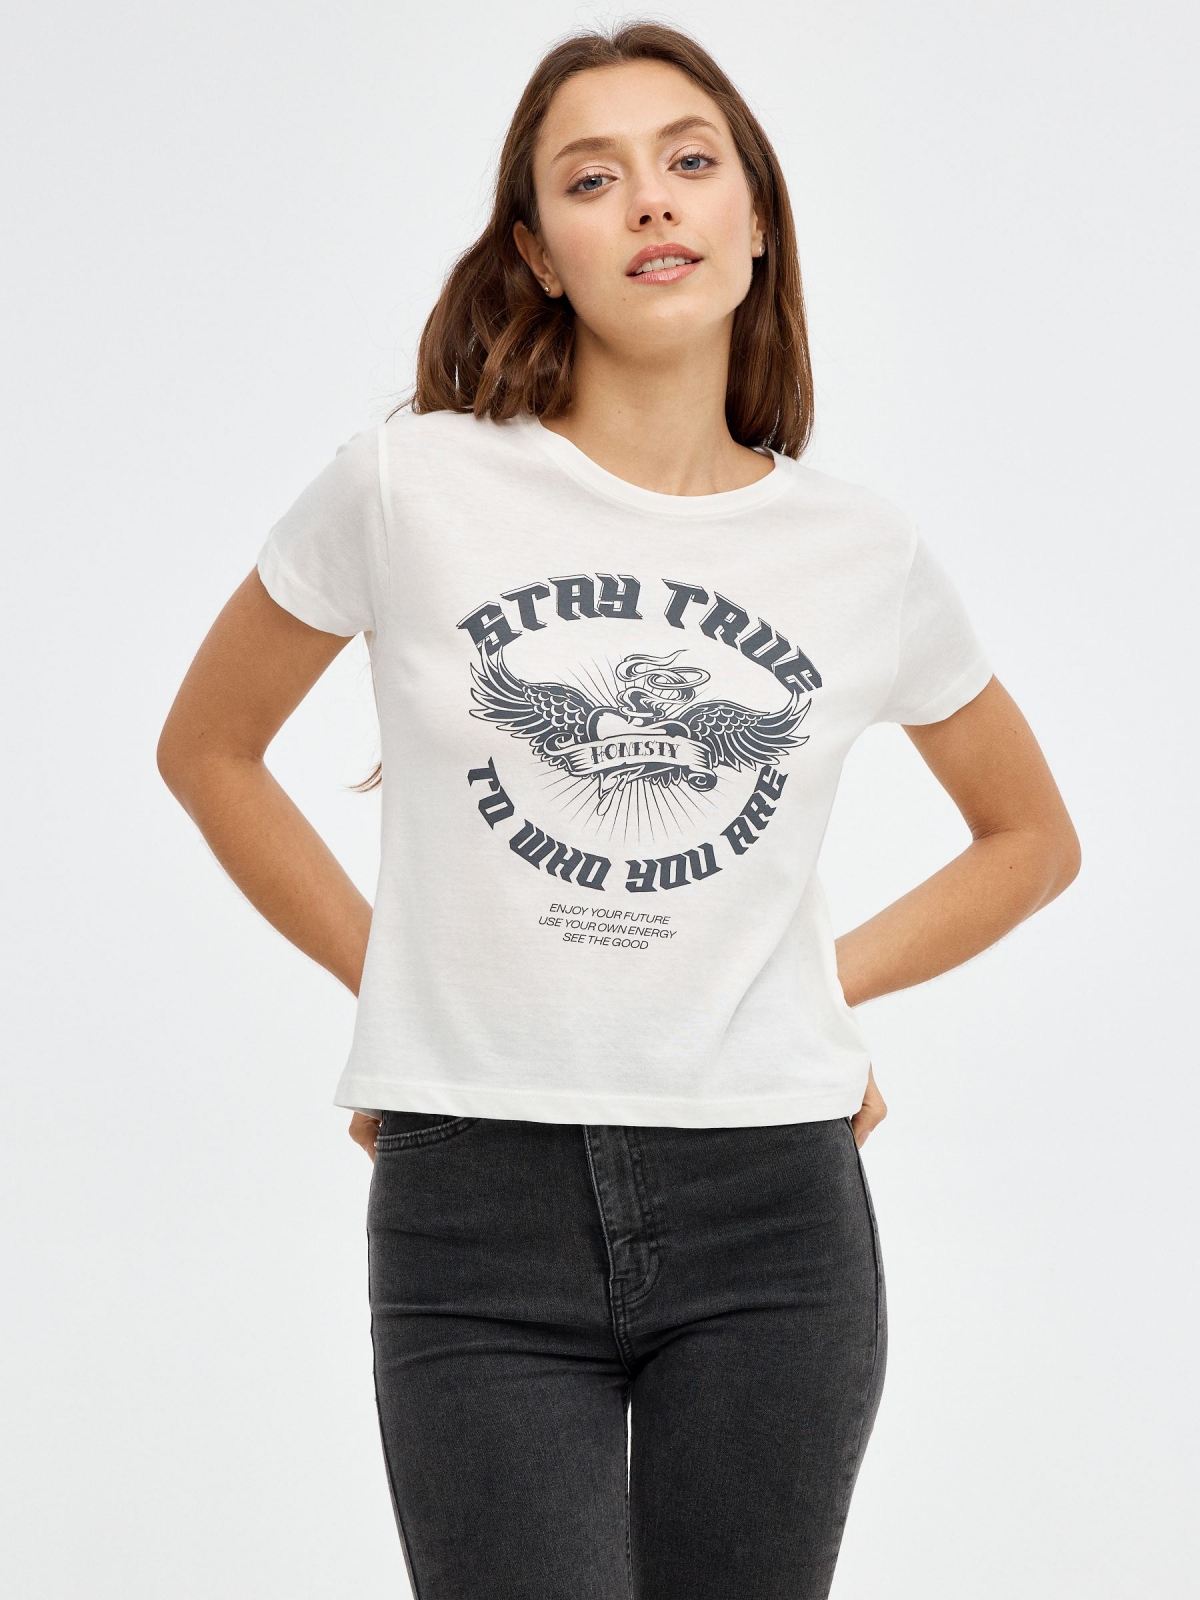 Stay True T-shirt off white middle front view